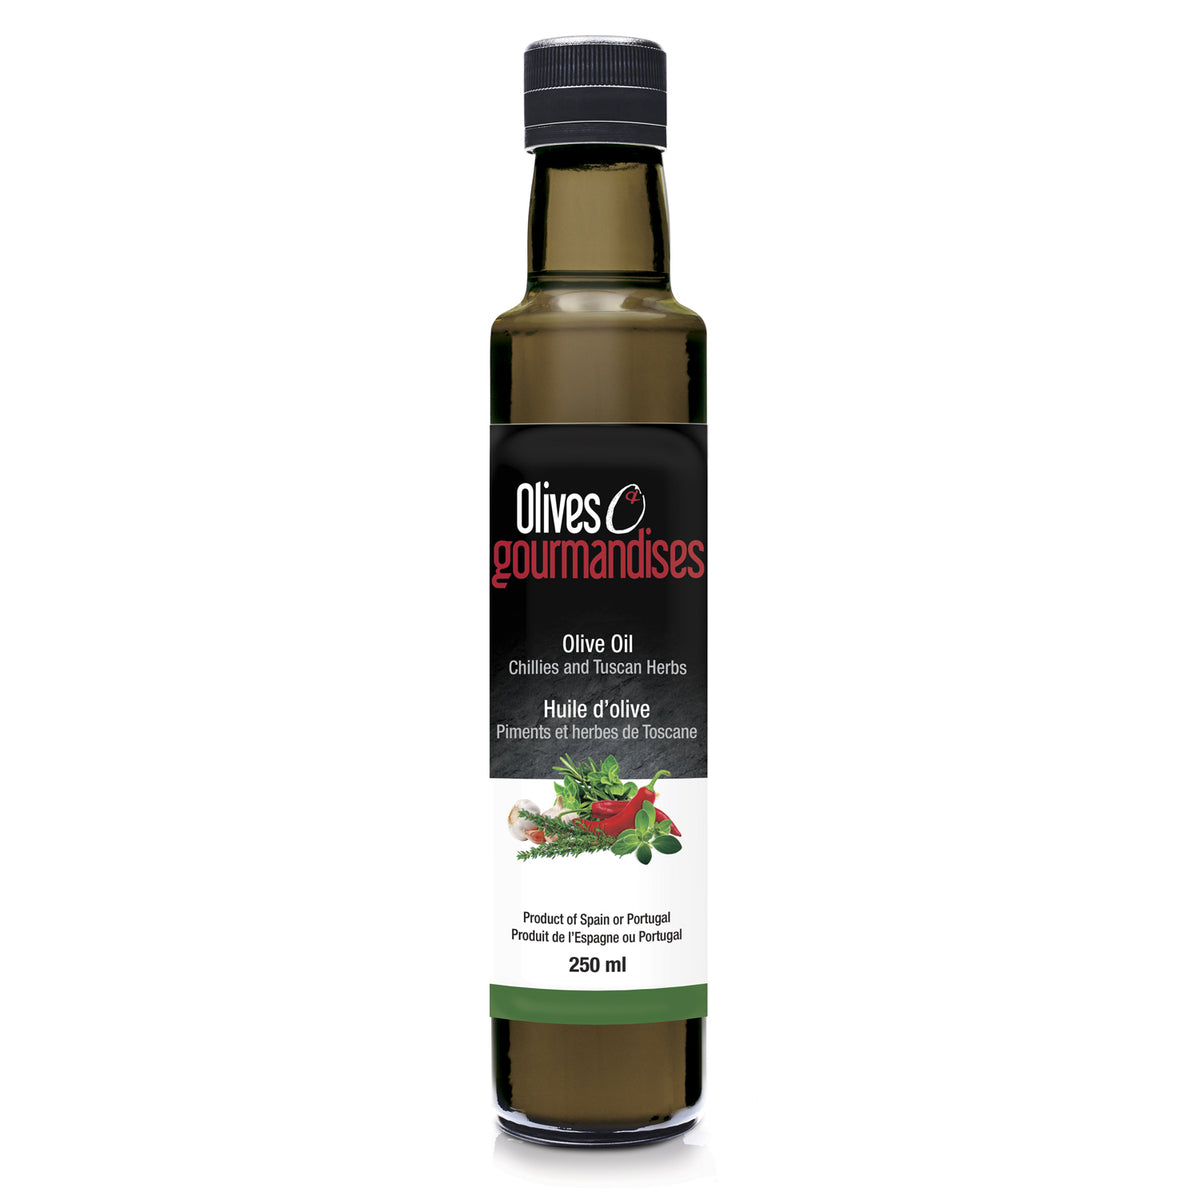 Chillies and tuscan herbs - Olive oil